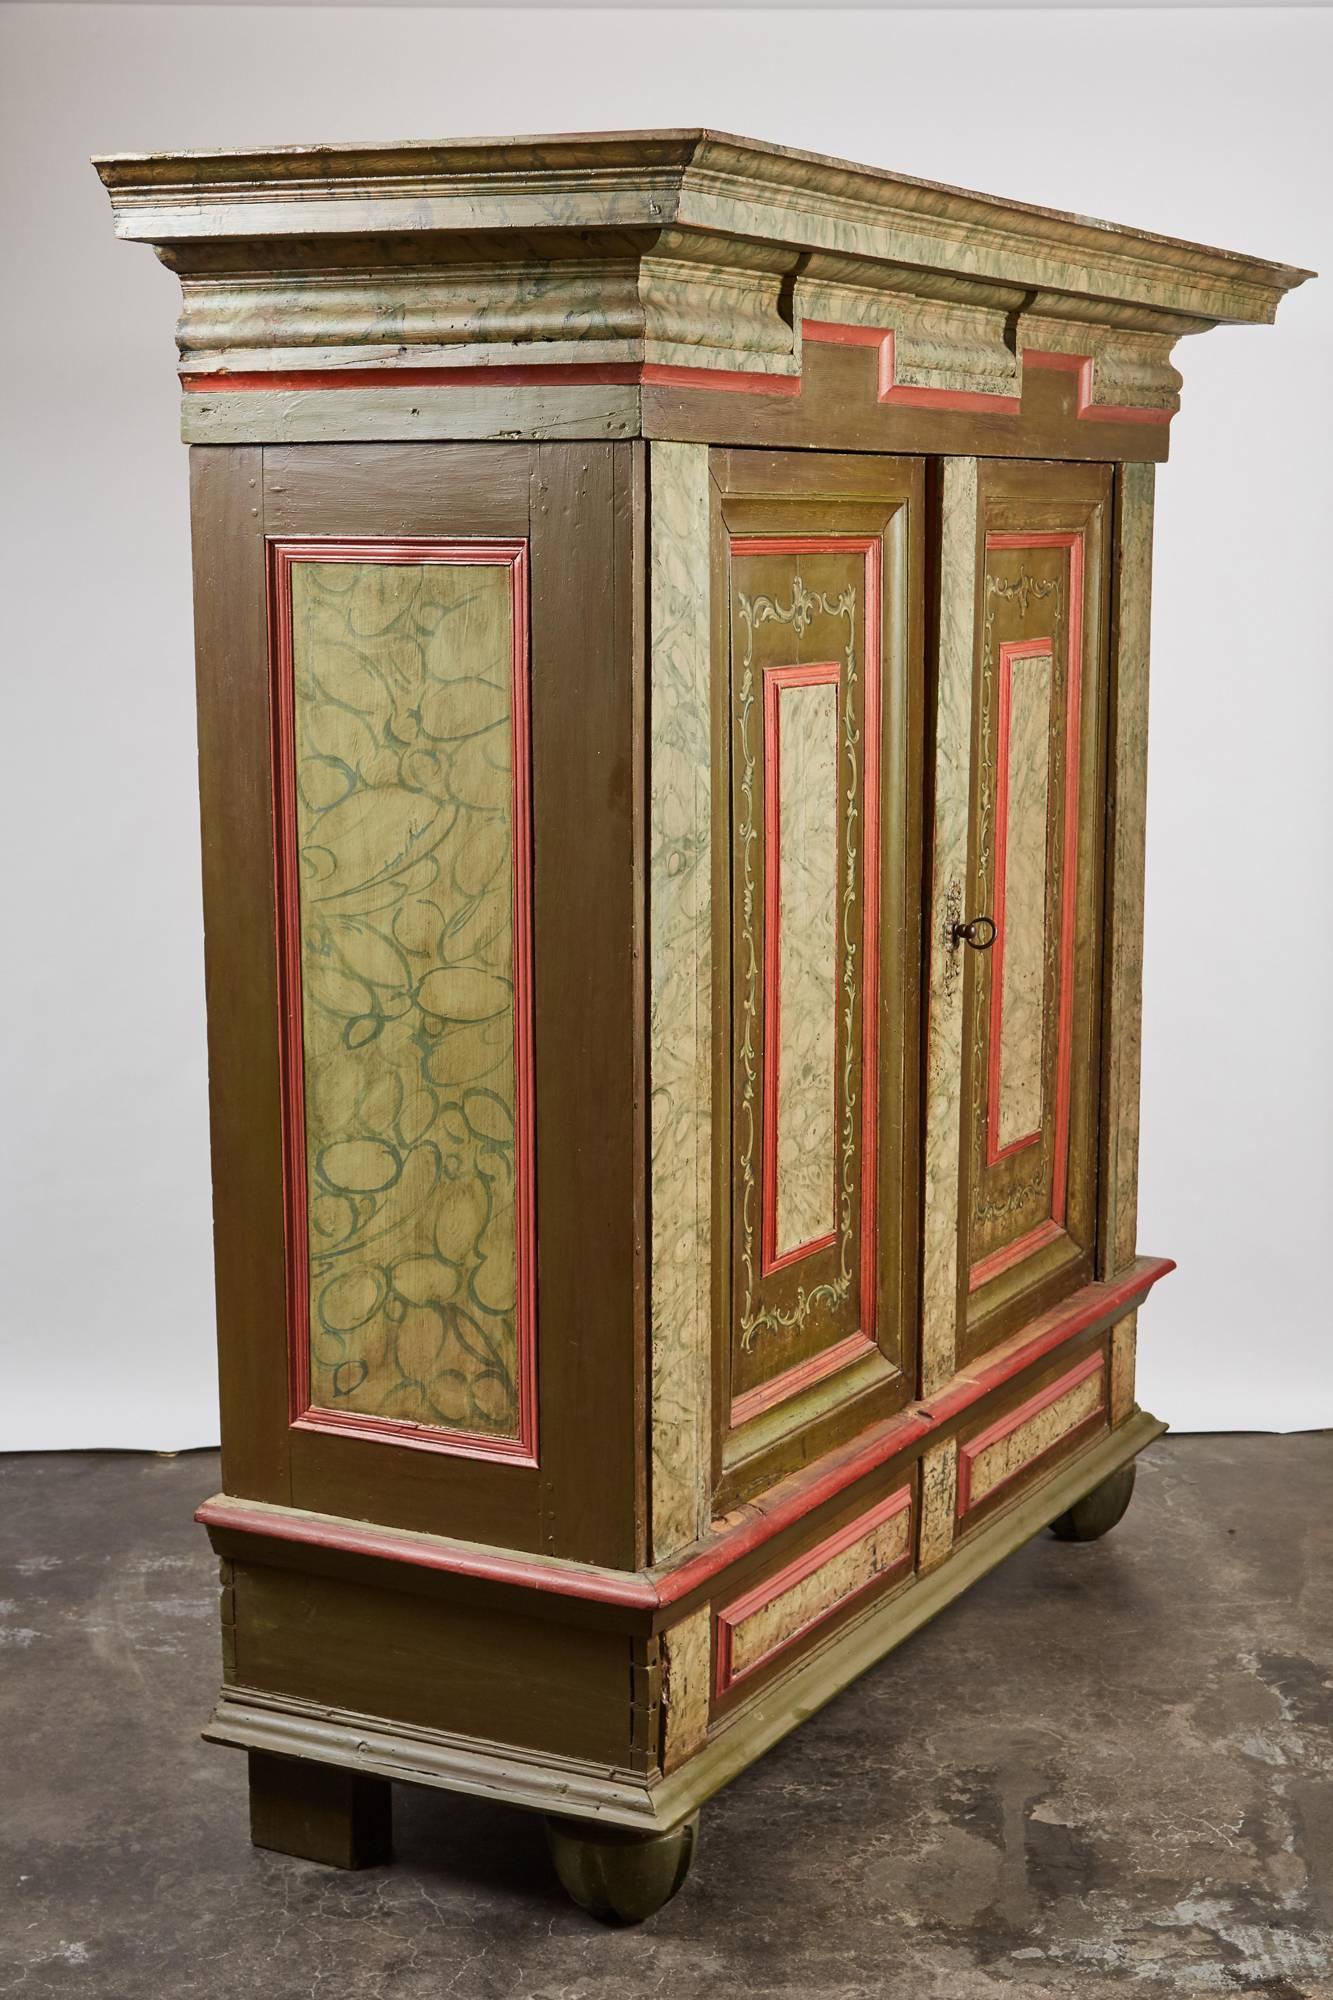 A unique hand painted cupboard from 18th century Denmark. Two door cabinet has baroque details of a faux green varigated marble overall. The legs and back are newer due to its being originally installed with in the plaster walls of a Manor House